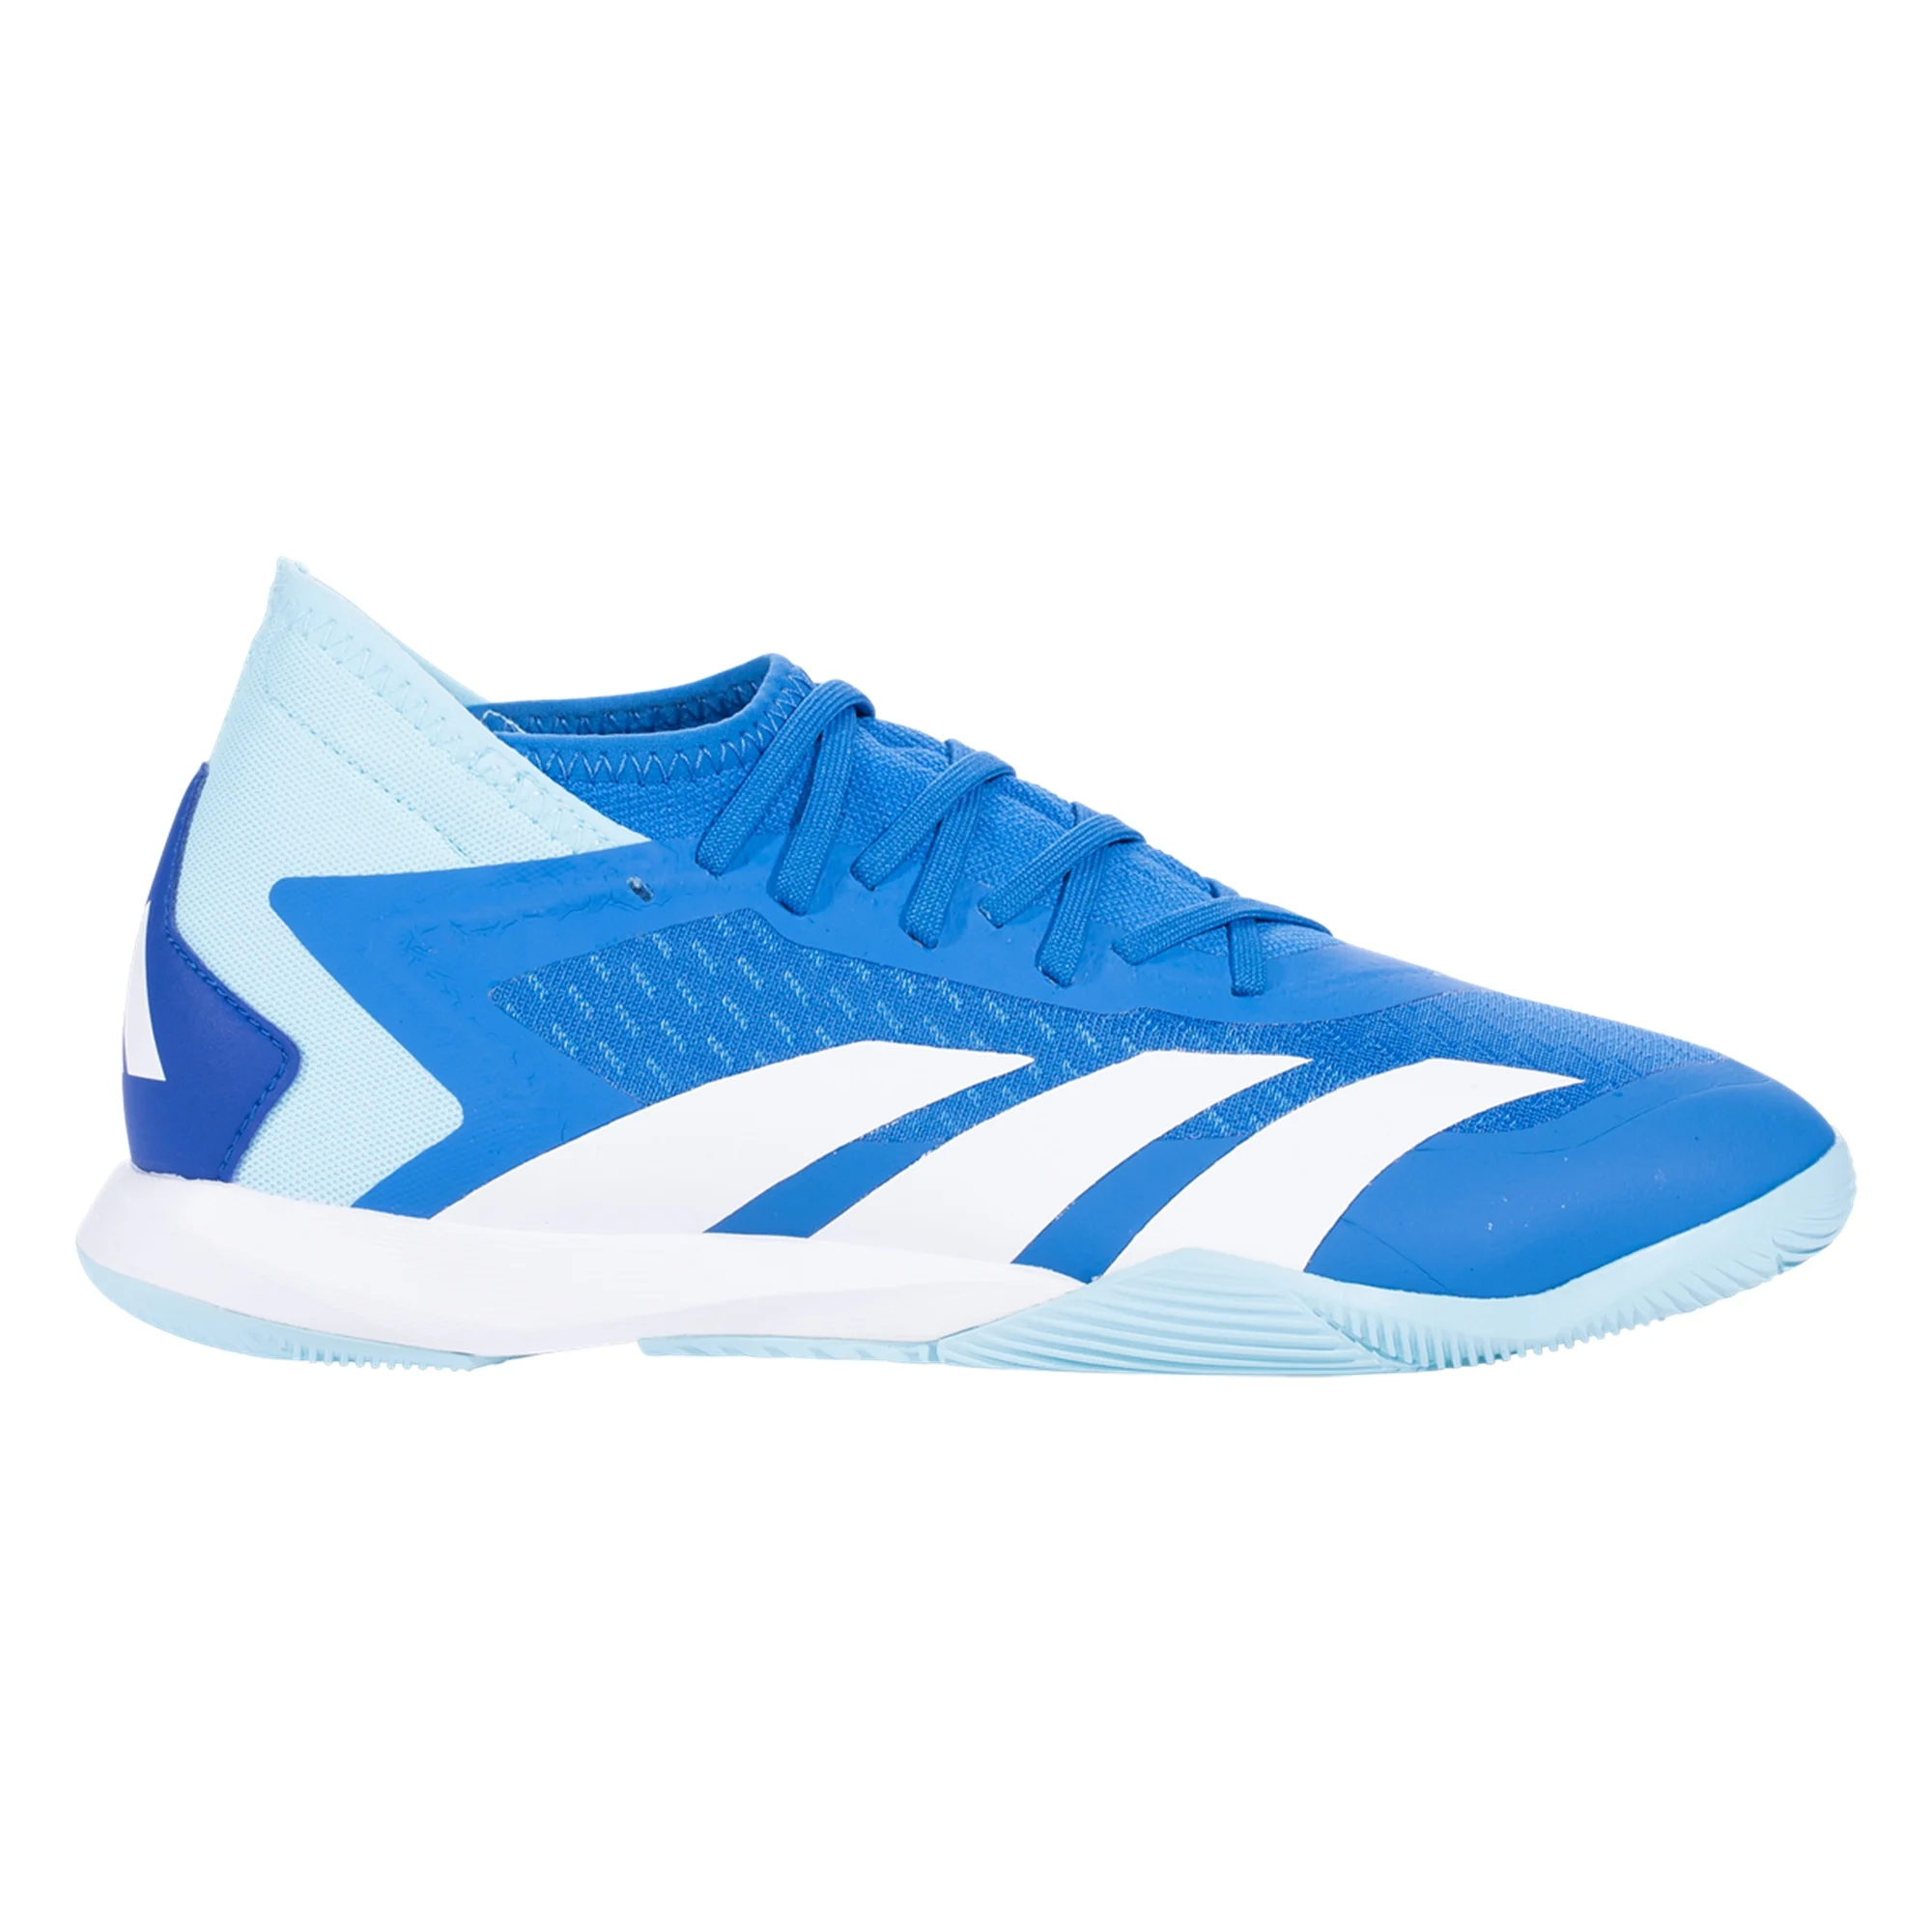 Soccer adidas Royal/Bliss Predator (Bright Accuracy.3 Indoor - Shoes Soccer Blu Wearhouse